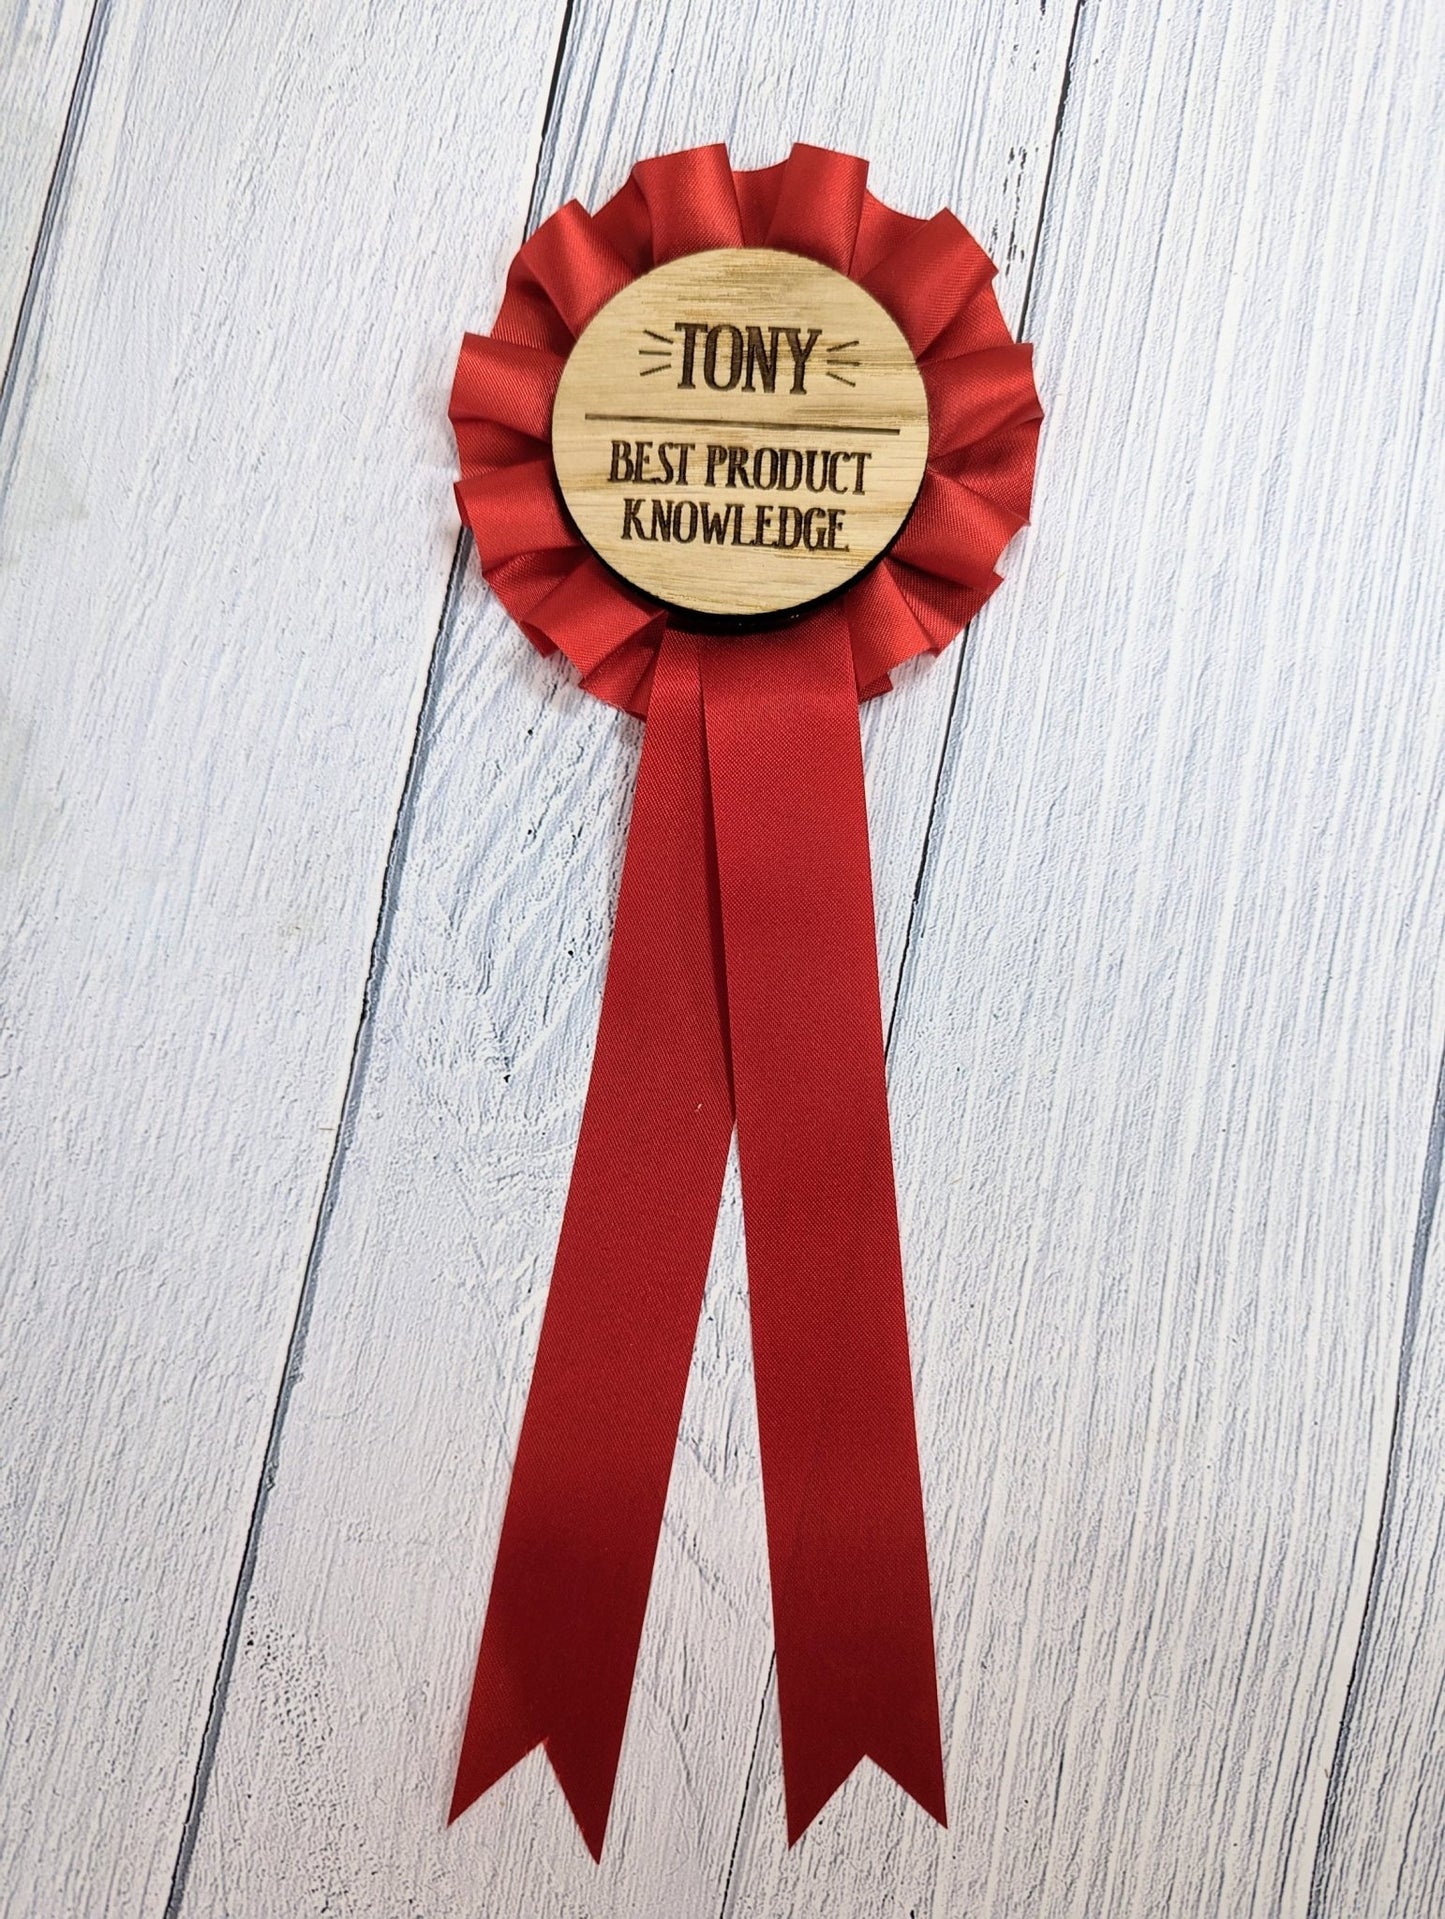 Customer Service Recognition Rosettes: Celebrate Achievements with Eco- Friendly Personalised Wooden Awards - CherryGroveCraft